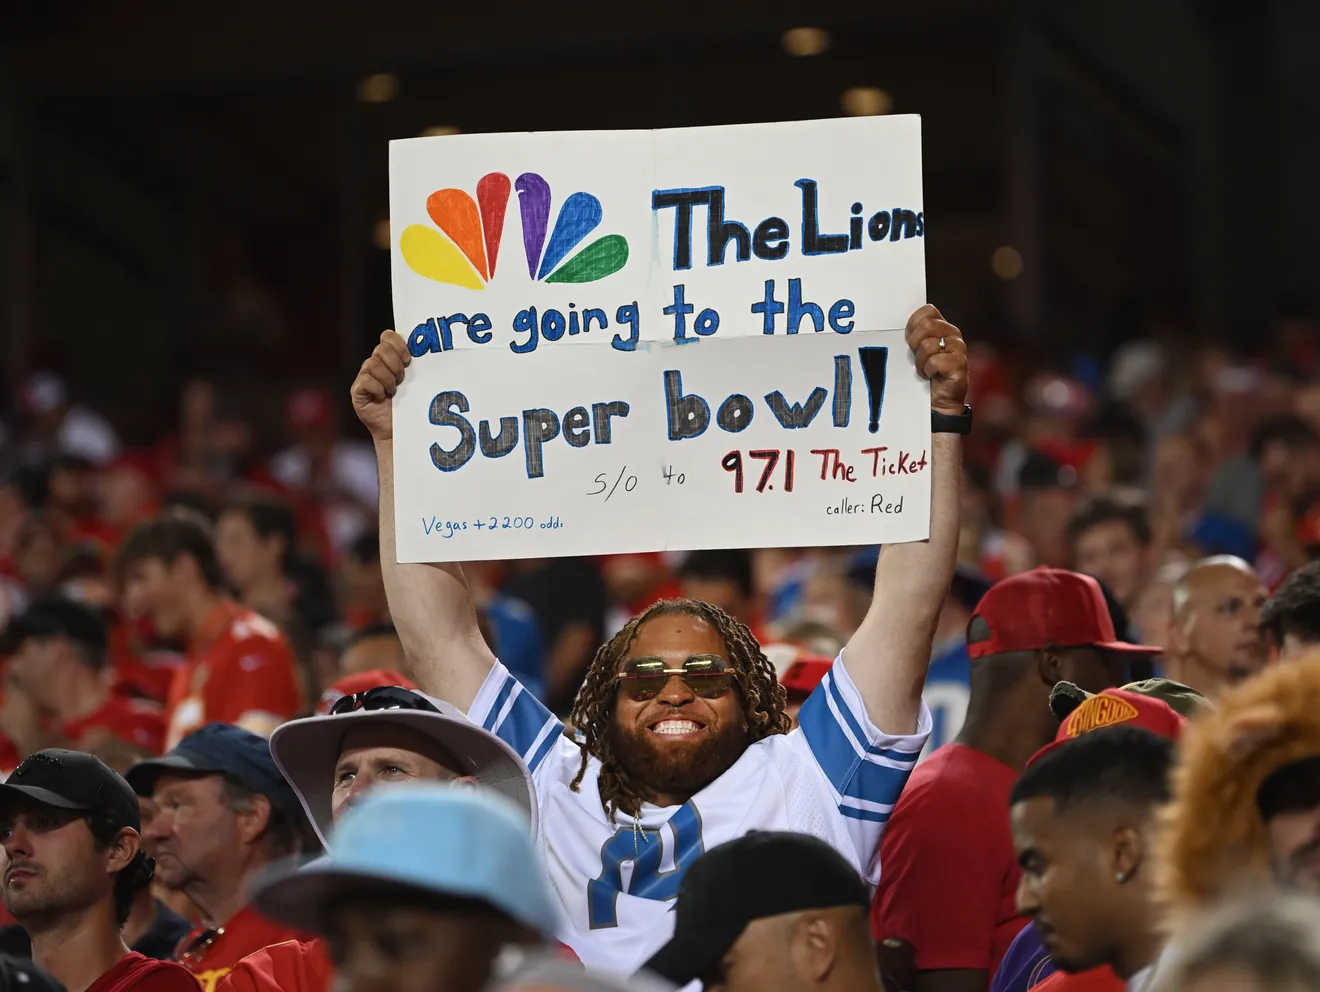 Lions fan holding up their creative sign.